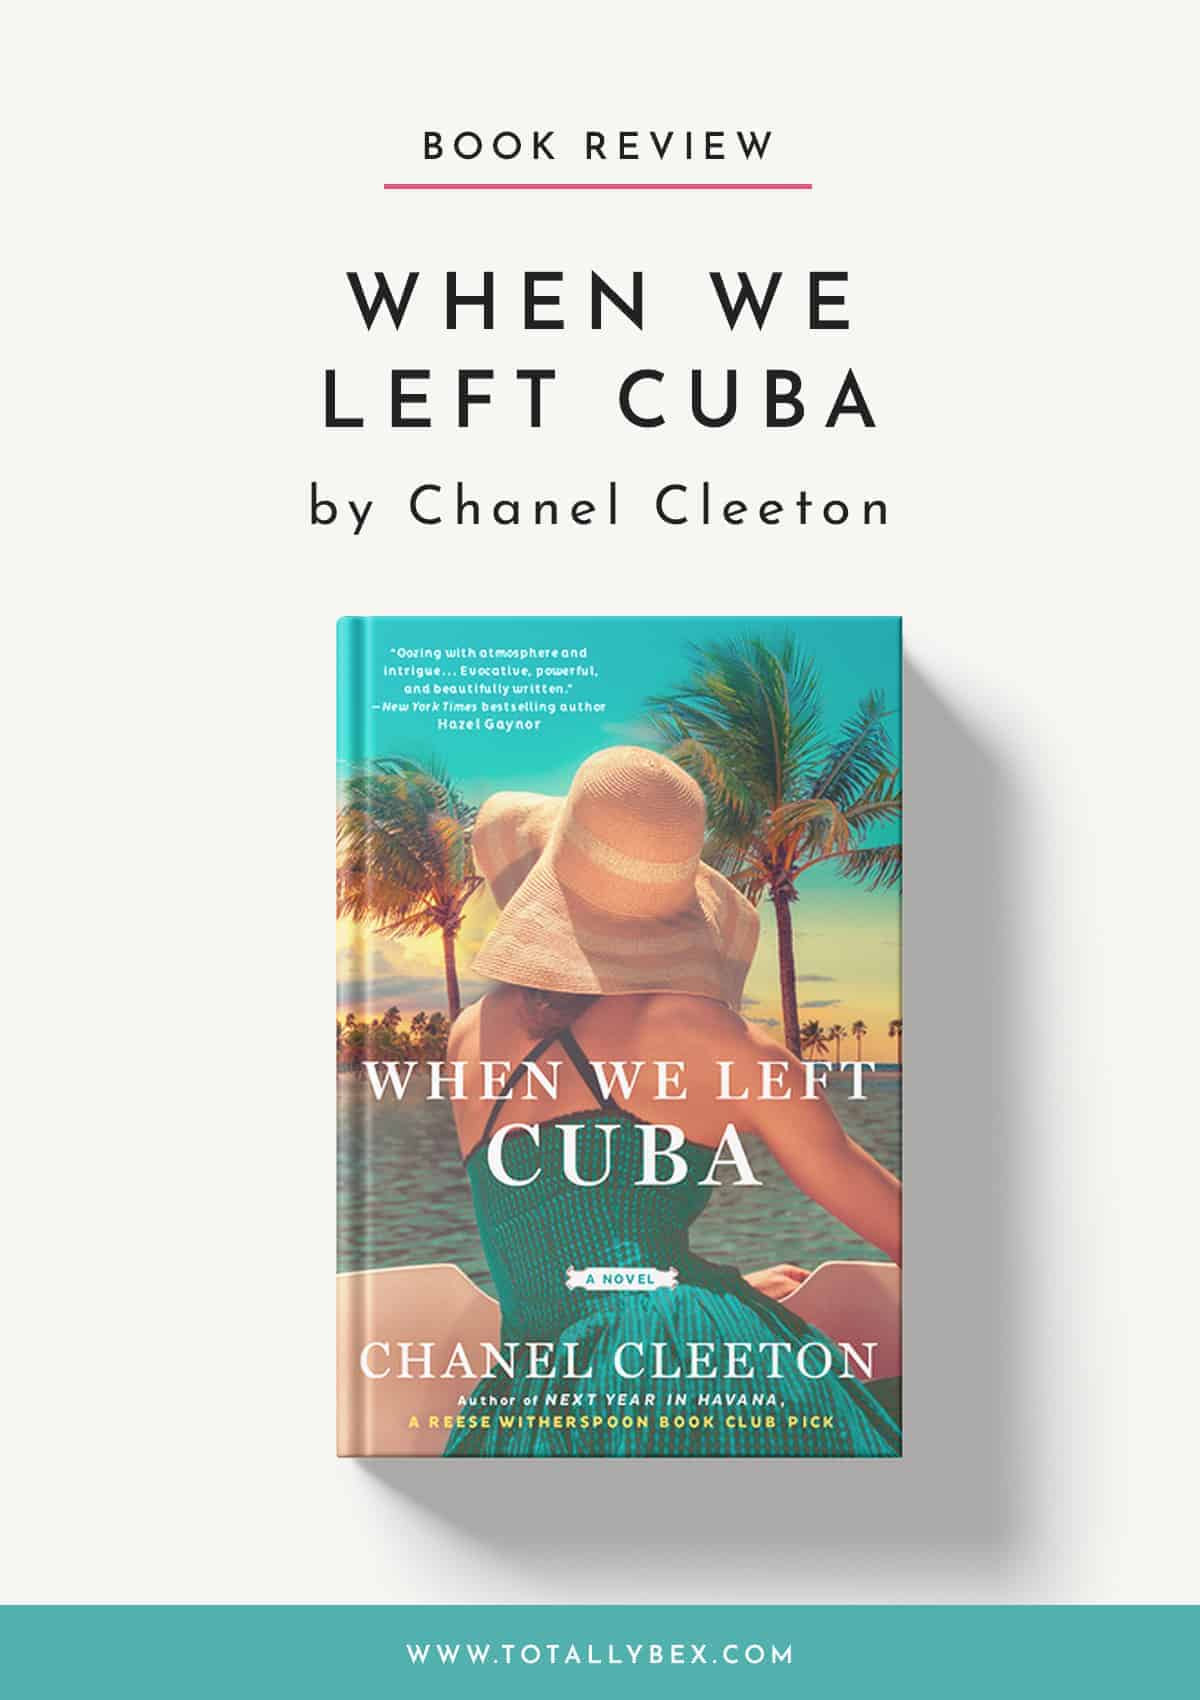 When We Left Cuba by Chanel Cleeton is a historical romance set in the 1960's that's full of glamour, intrigue, and suspense! This striking story about a woman who makes it her mission to avenge her brother’s death and bring down the man responsible is riveting from beginning to end.